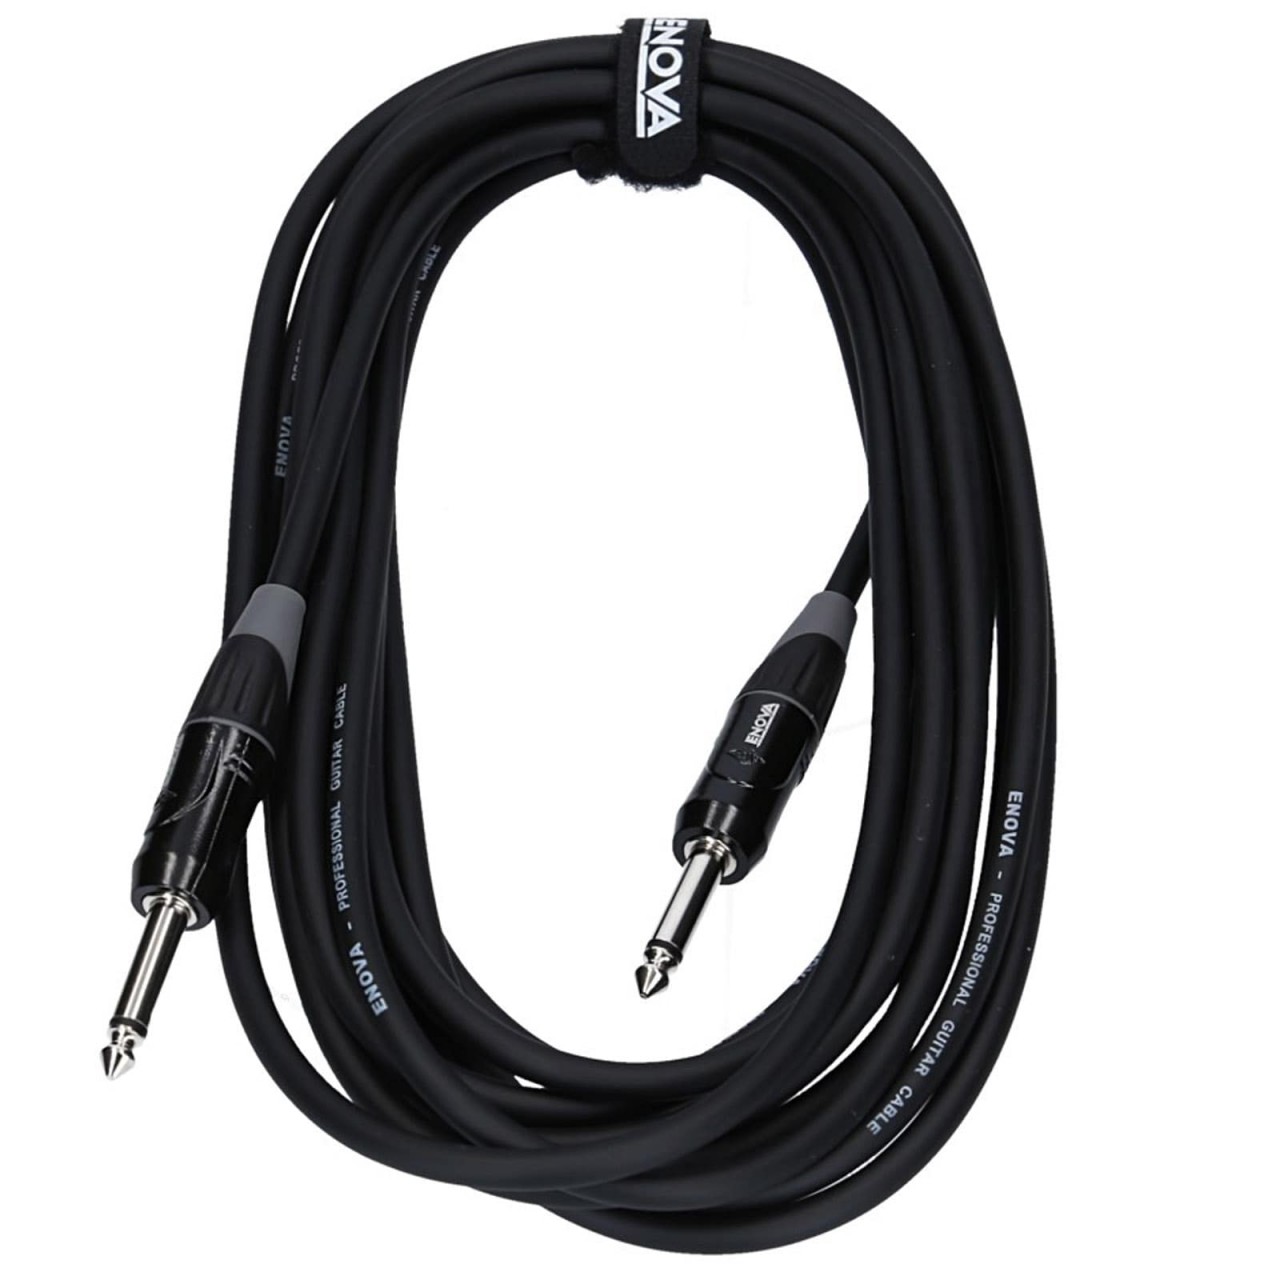 15m jack cable in communication technology for stereo systems, mixing consoles, effects units, synthesizers, keyboards, electric pianos, electric guitars and guitar amplifiers.